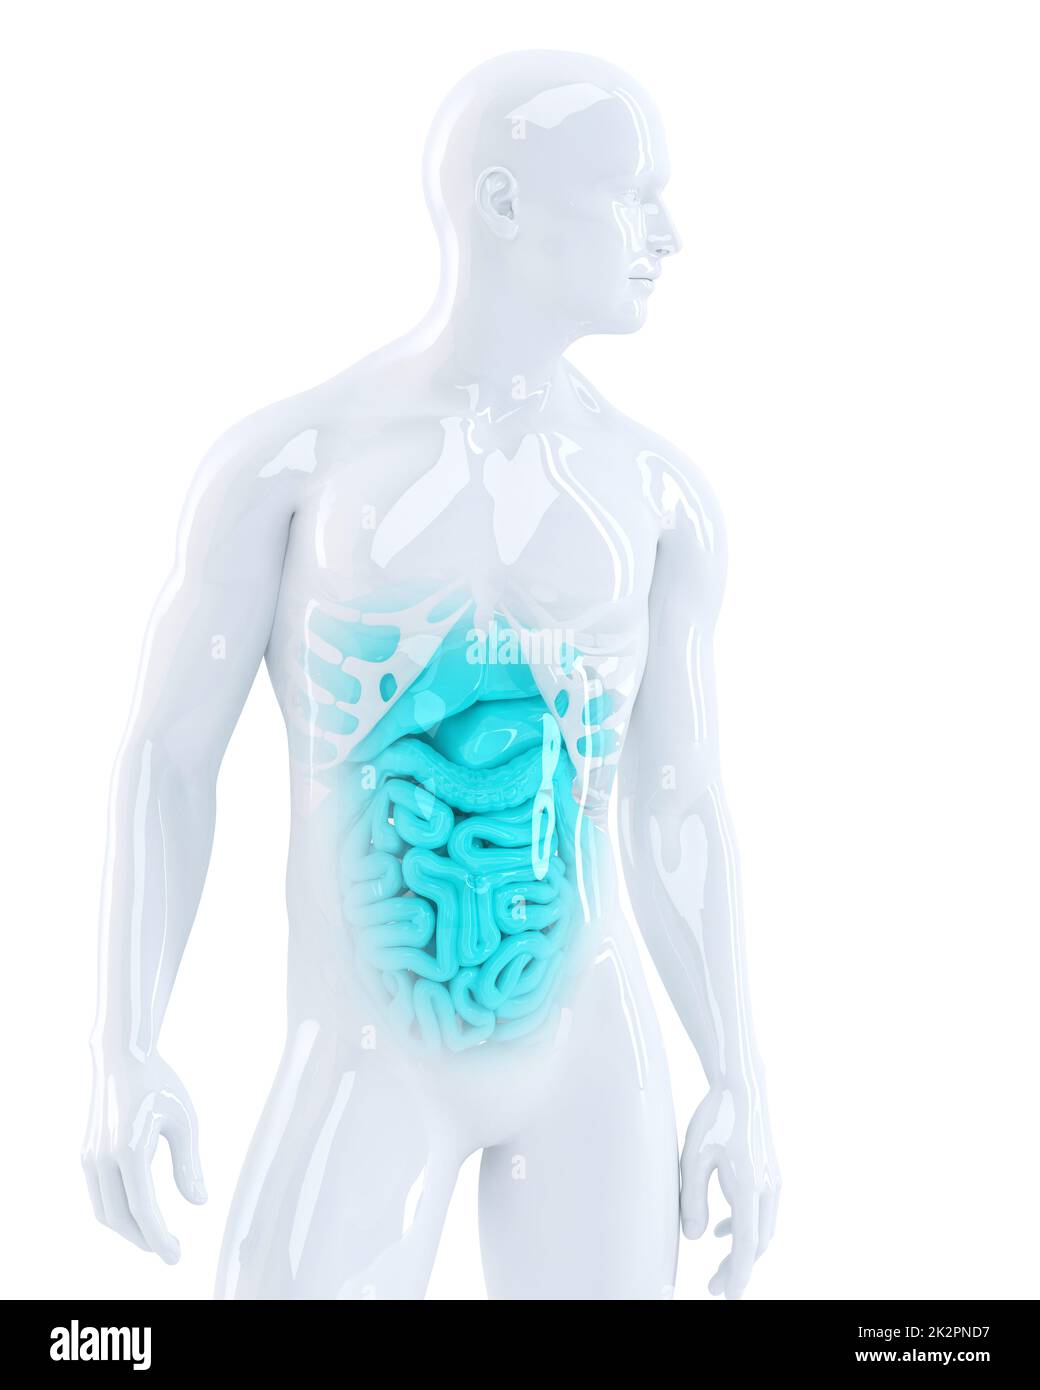 3d illustration of a male internal organs. Isolated. Contains clipping path Stock Photo